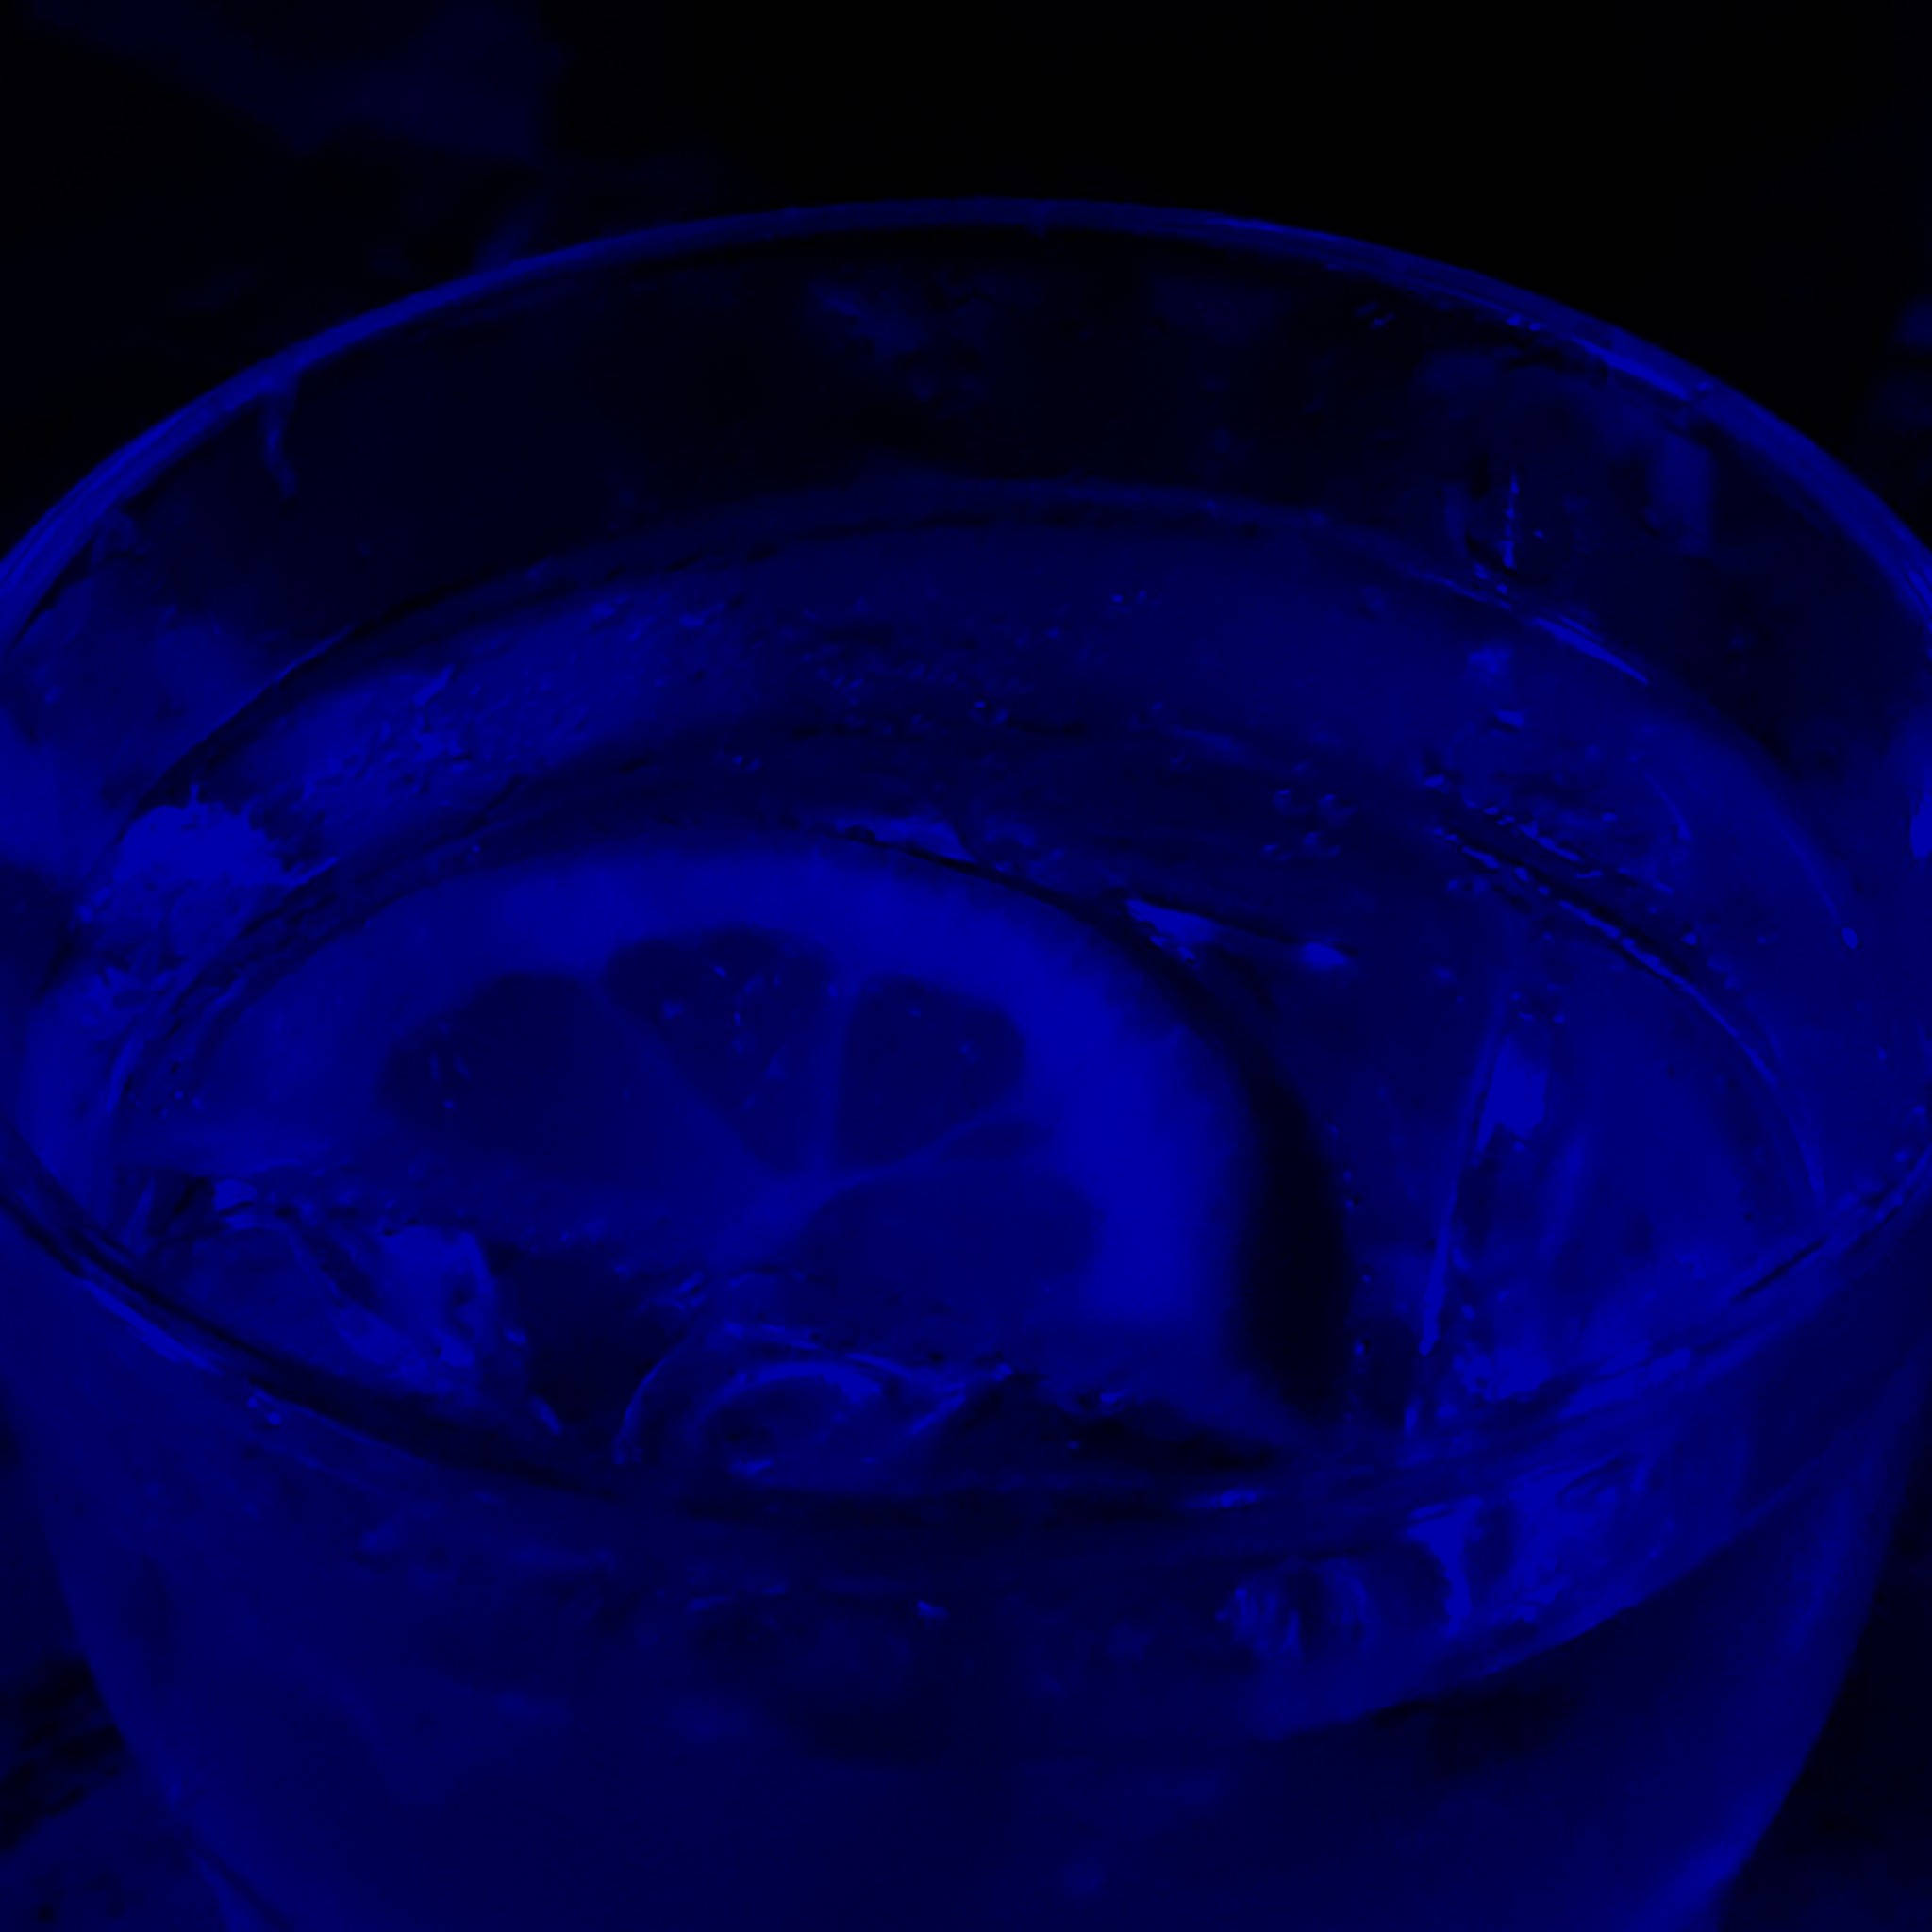 A glass of water with lemon slices in it - Dark blue